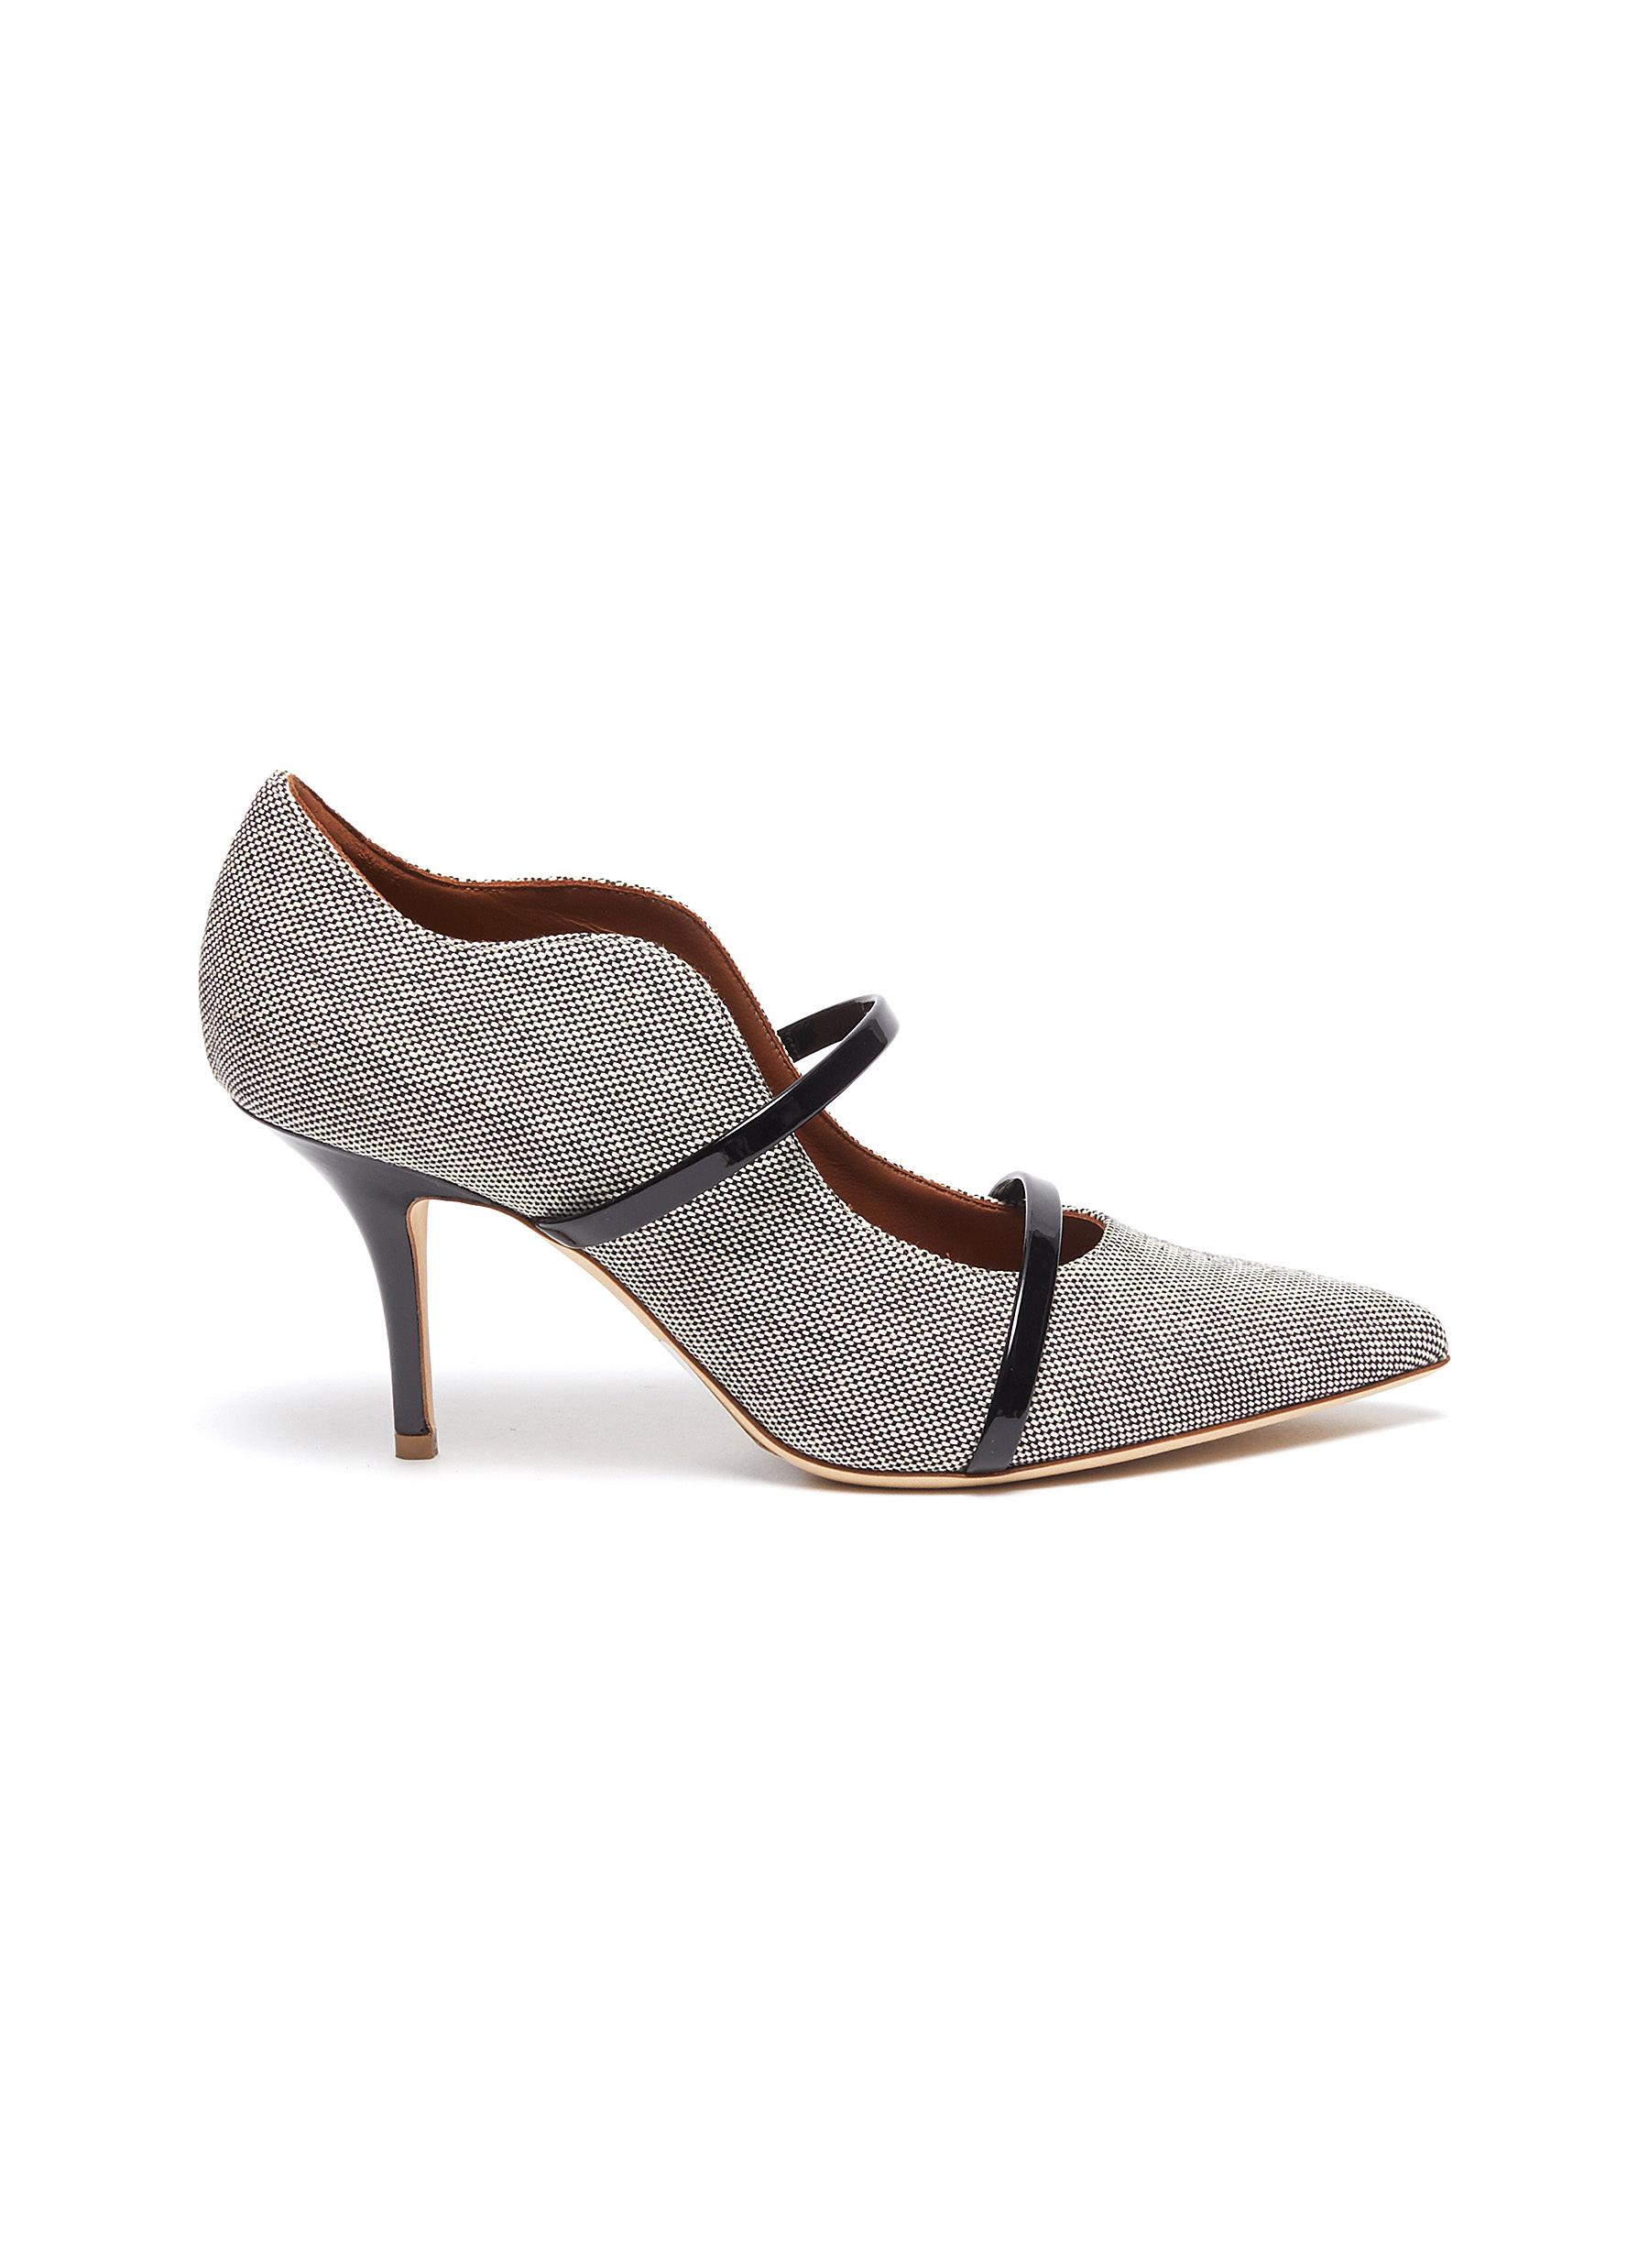 Malone Souliers Maureen' Tweed Leather Pumps In Black,white